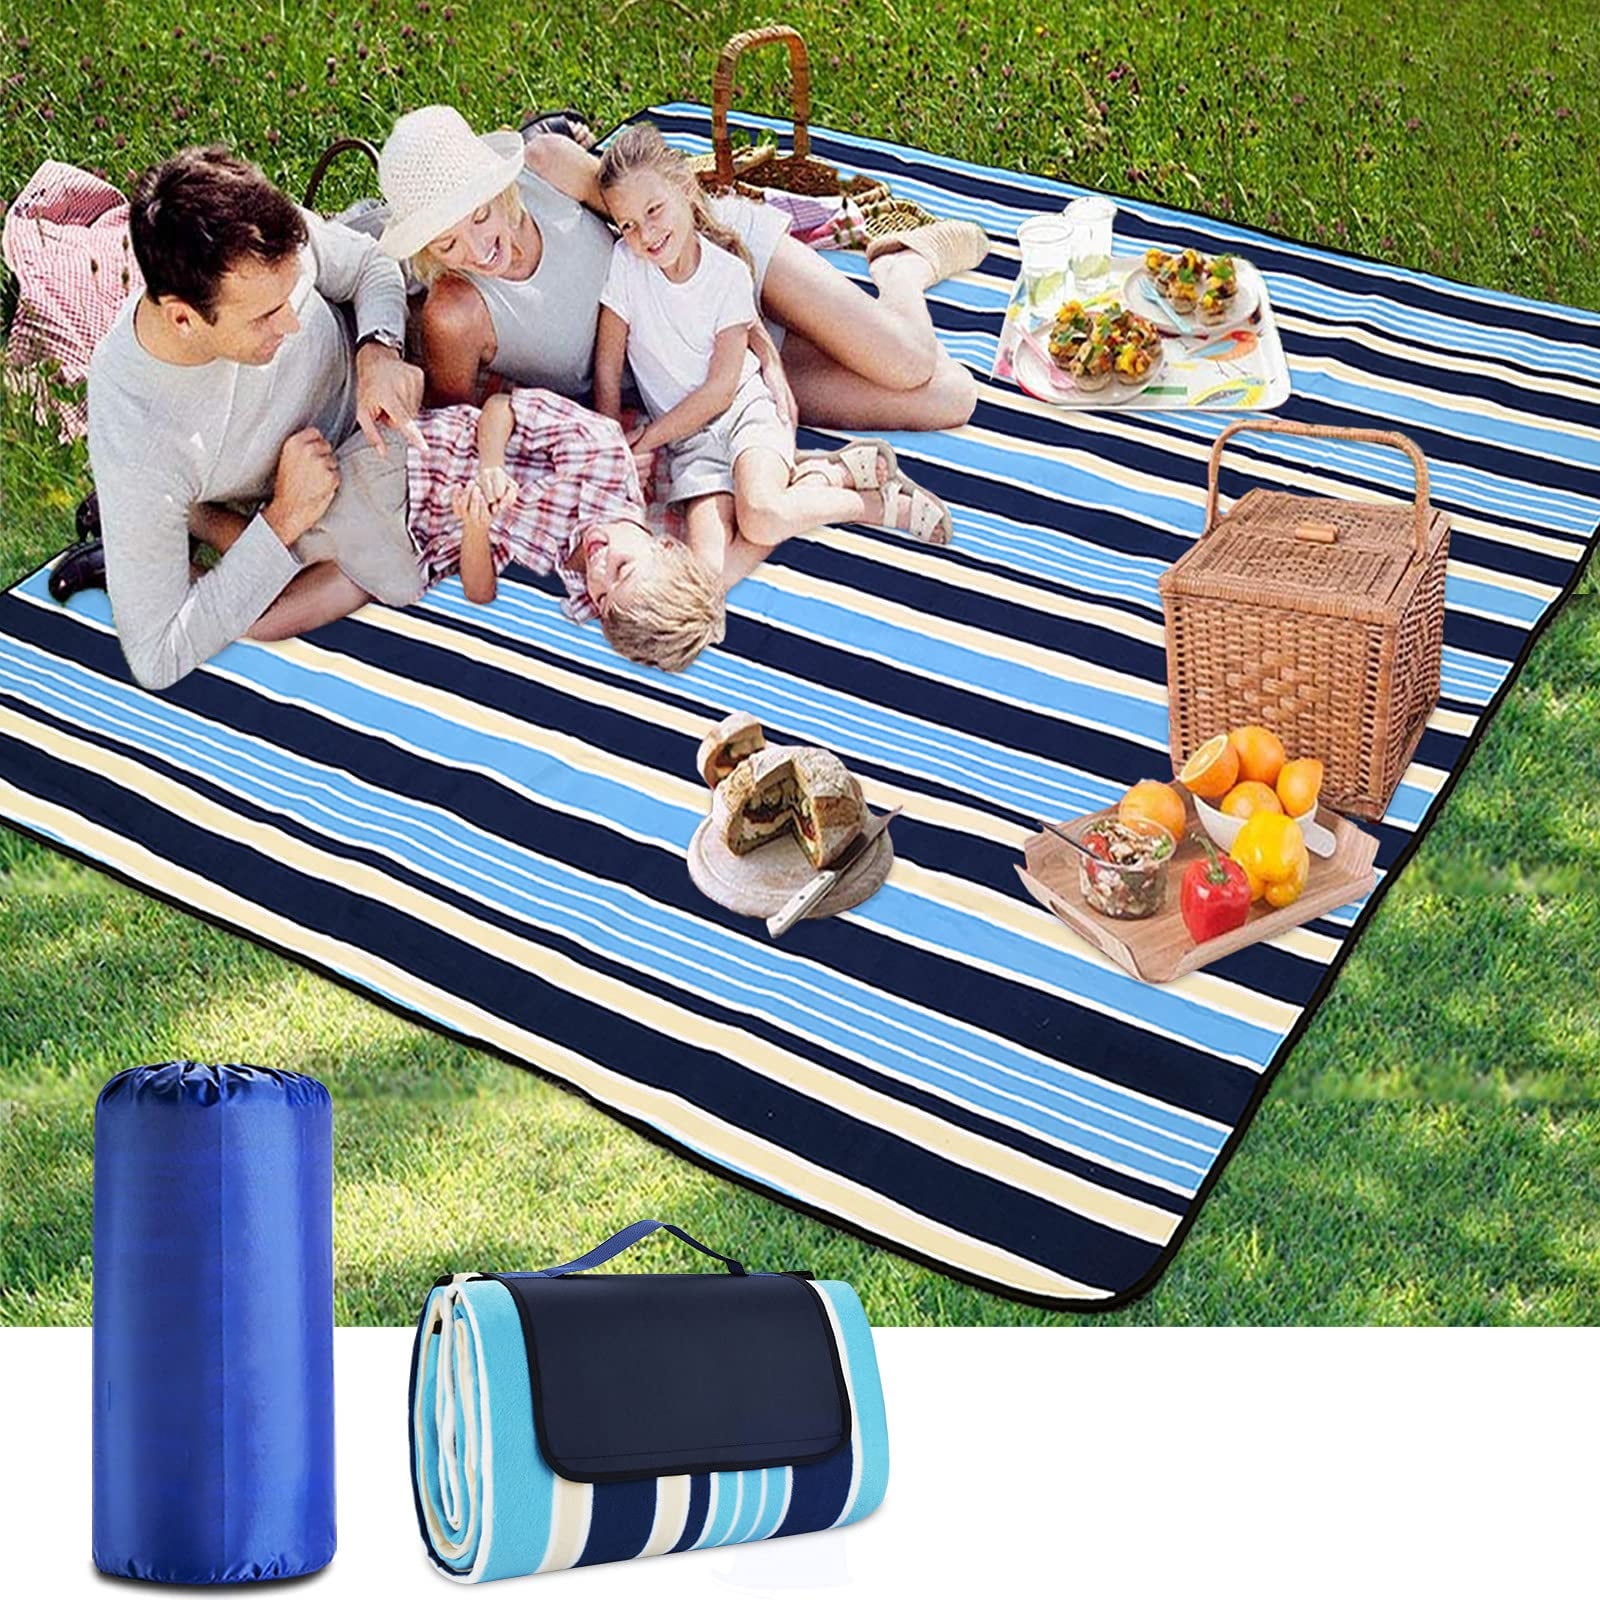 Details about   Sand Free Beach Mat Blanket Waterproof Picnic Travel Camping Outdoor Mat 145*200 